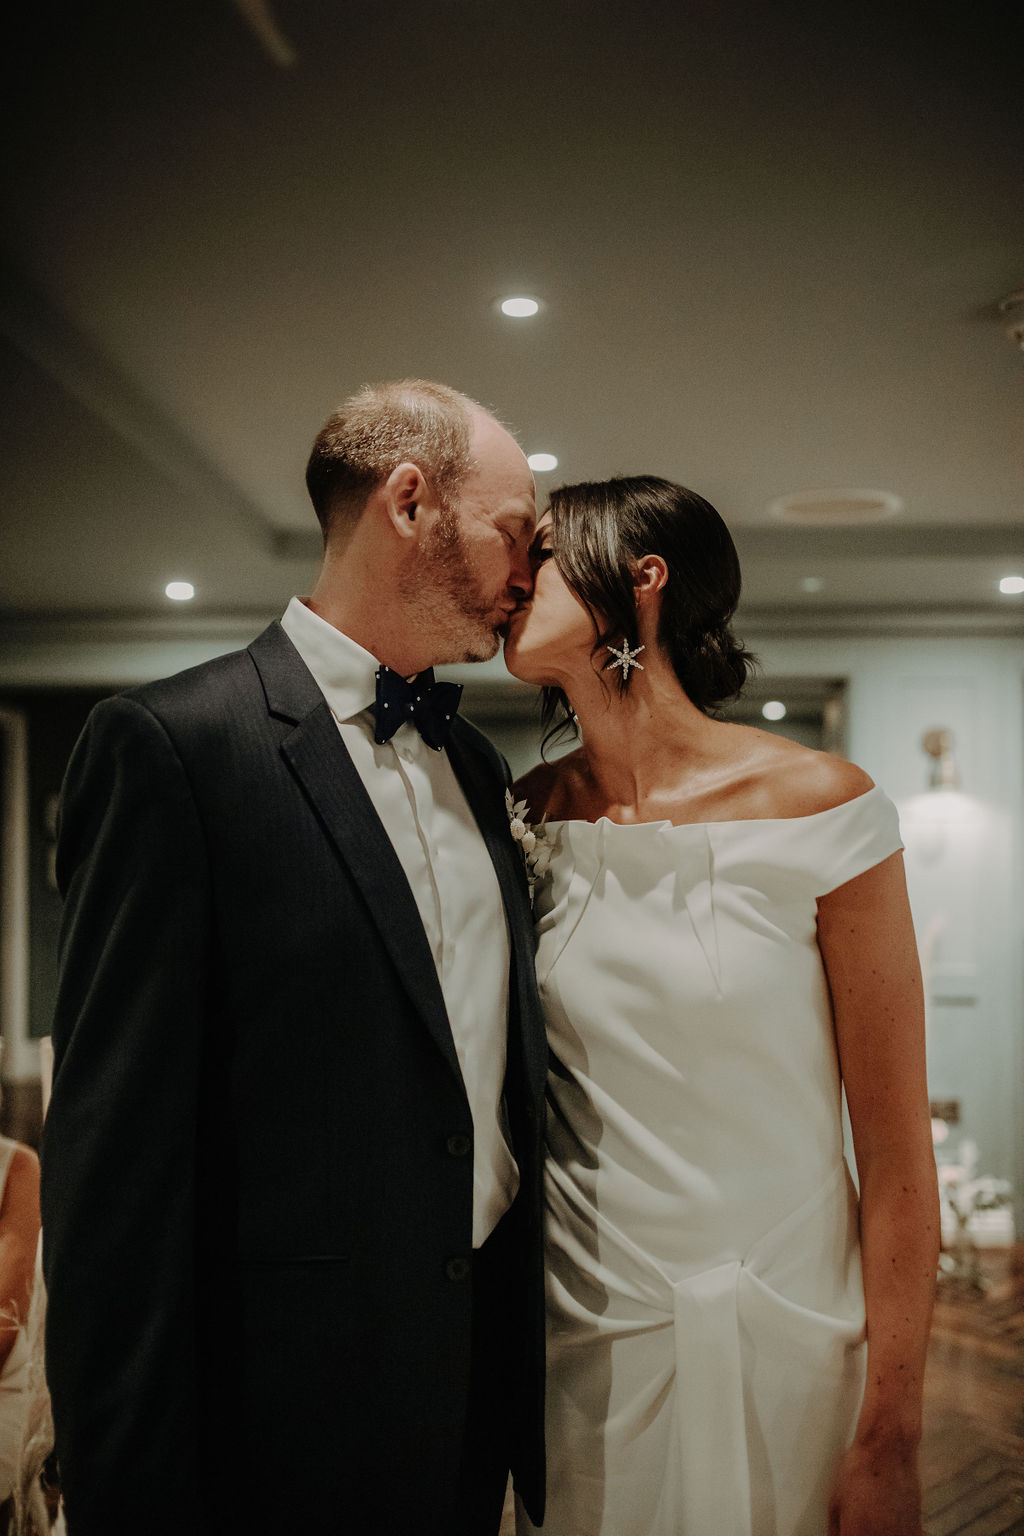 An Intimate City Wedding in Manchester (c) Gail Secker Photography (30)